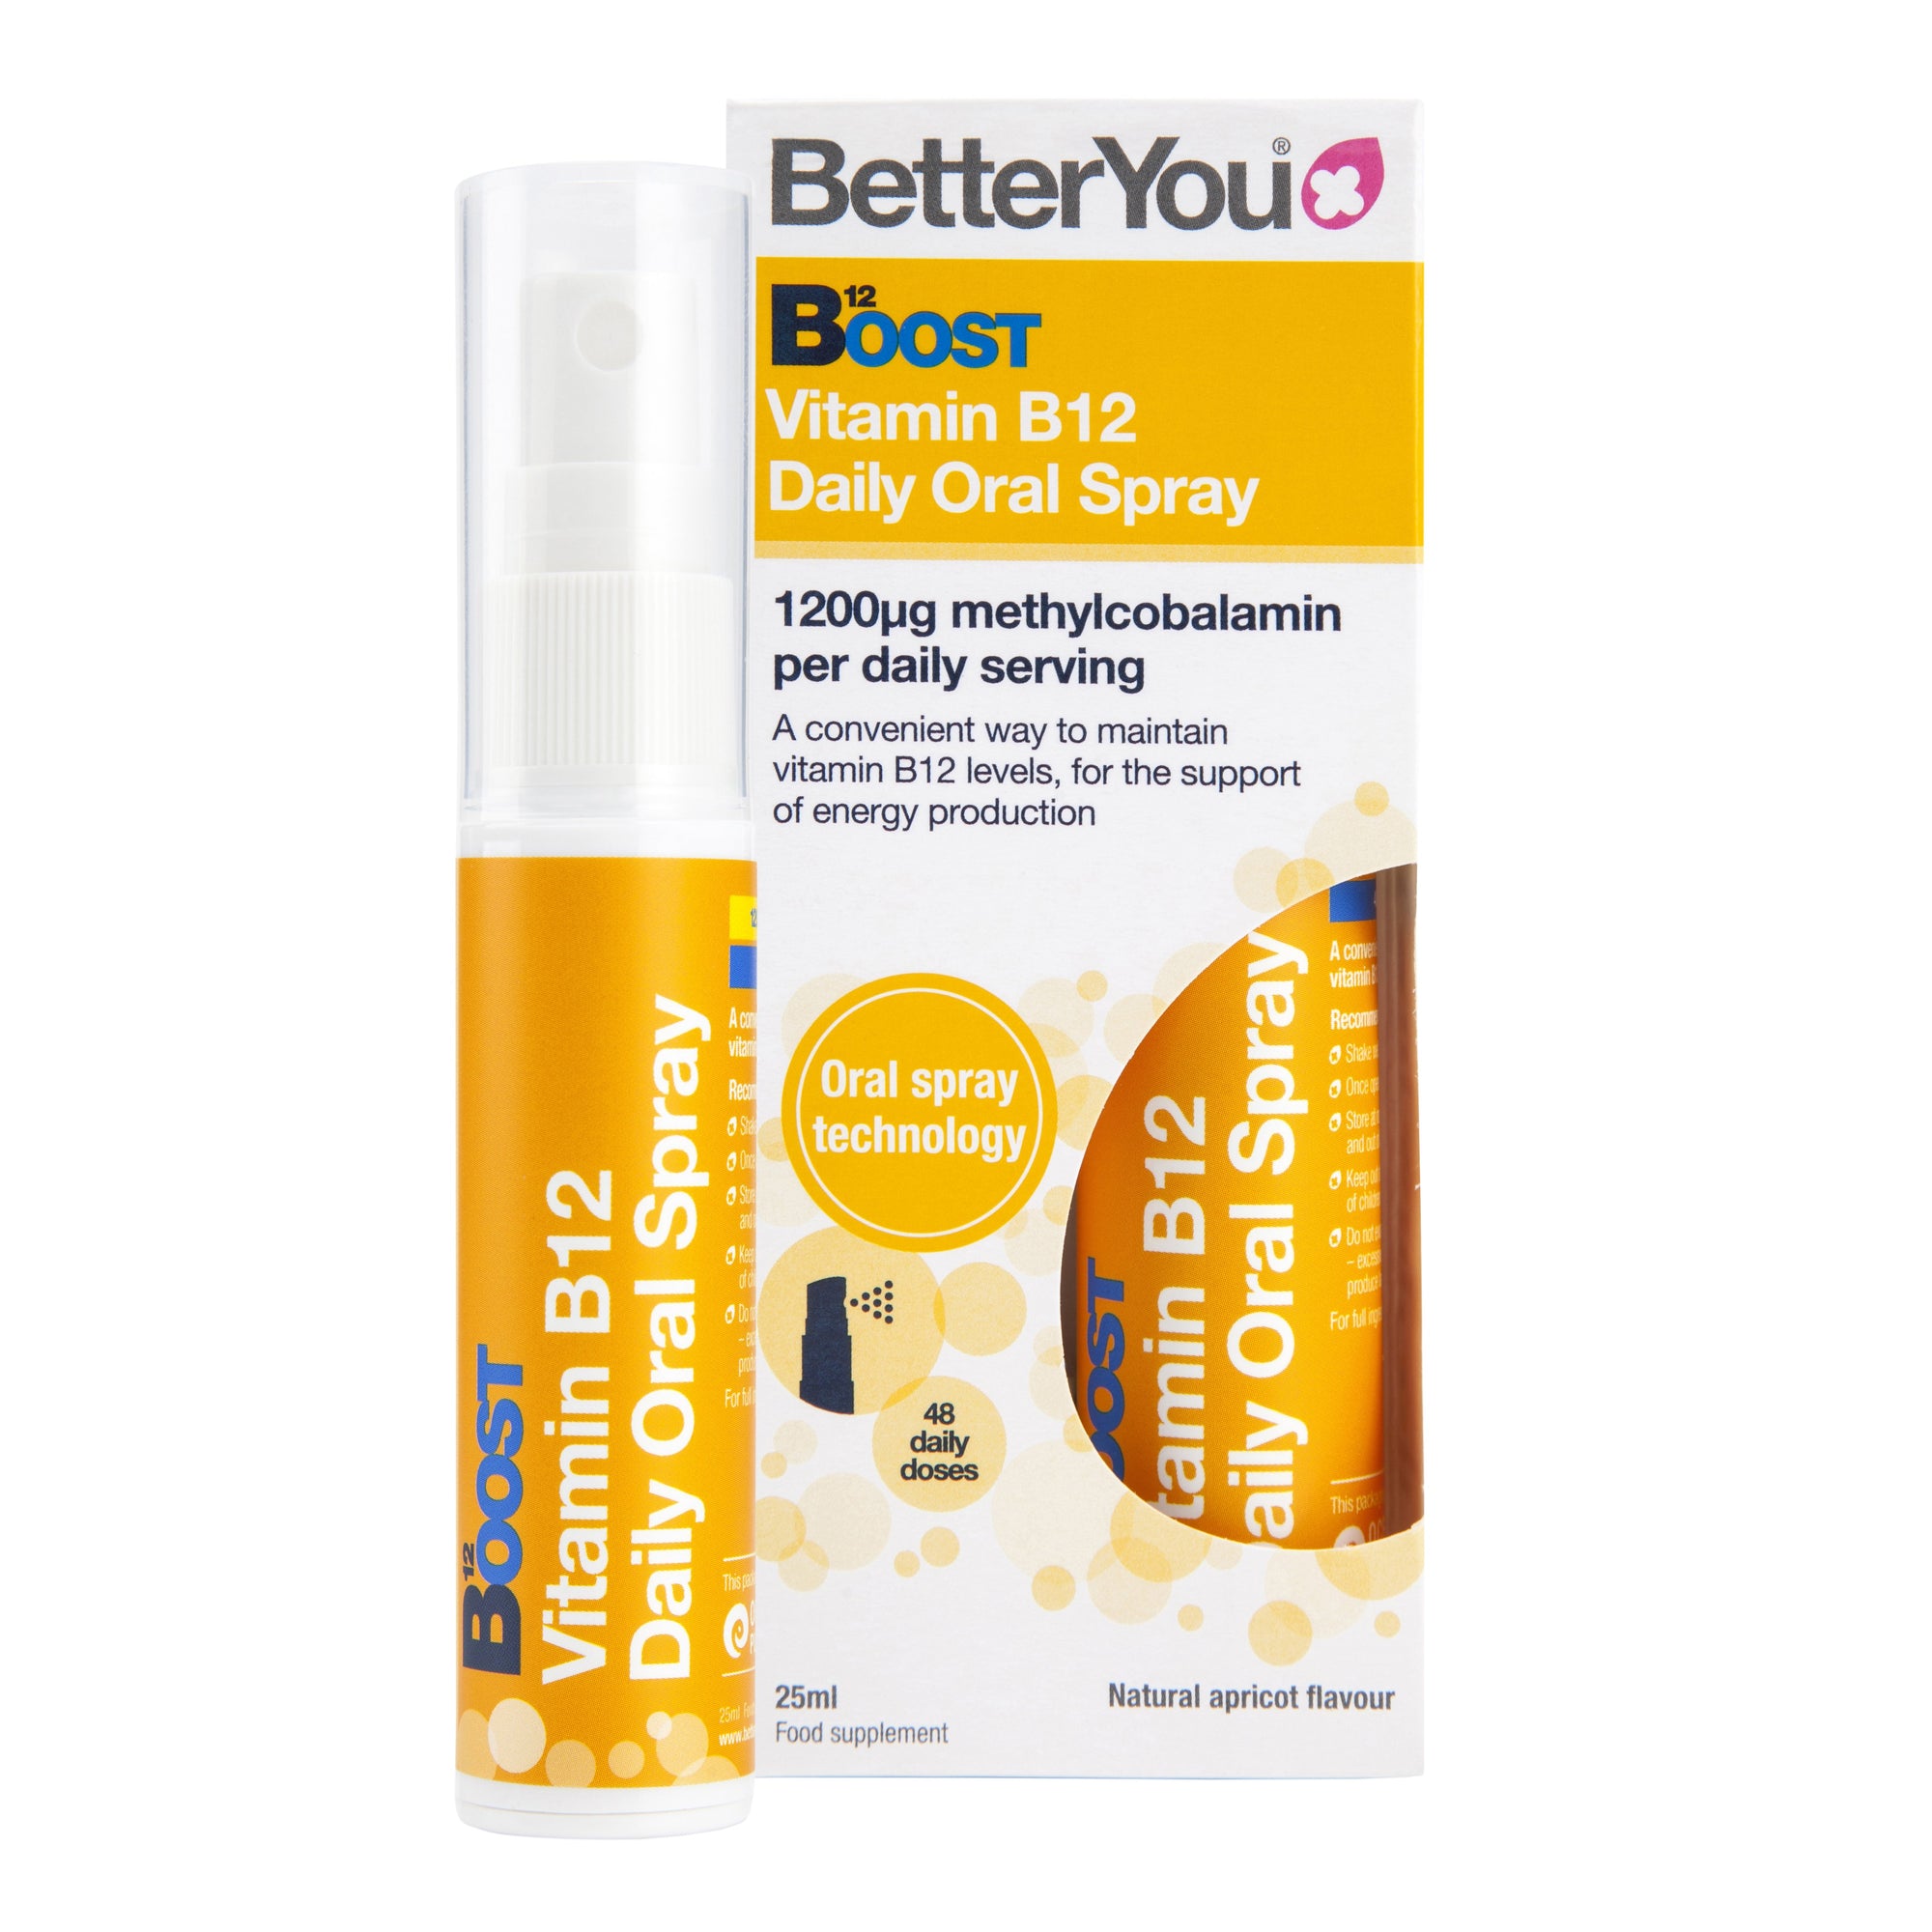 Better You Vitamin B12 Oral Spray, Immune Support, Fatigue, Leahys Pharmacy